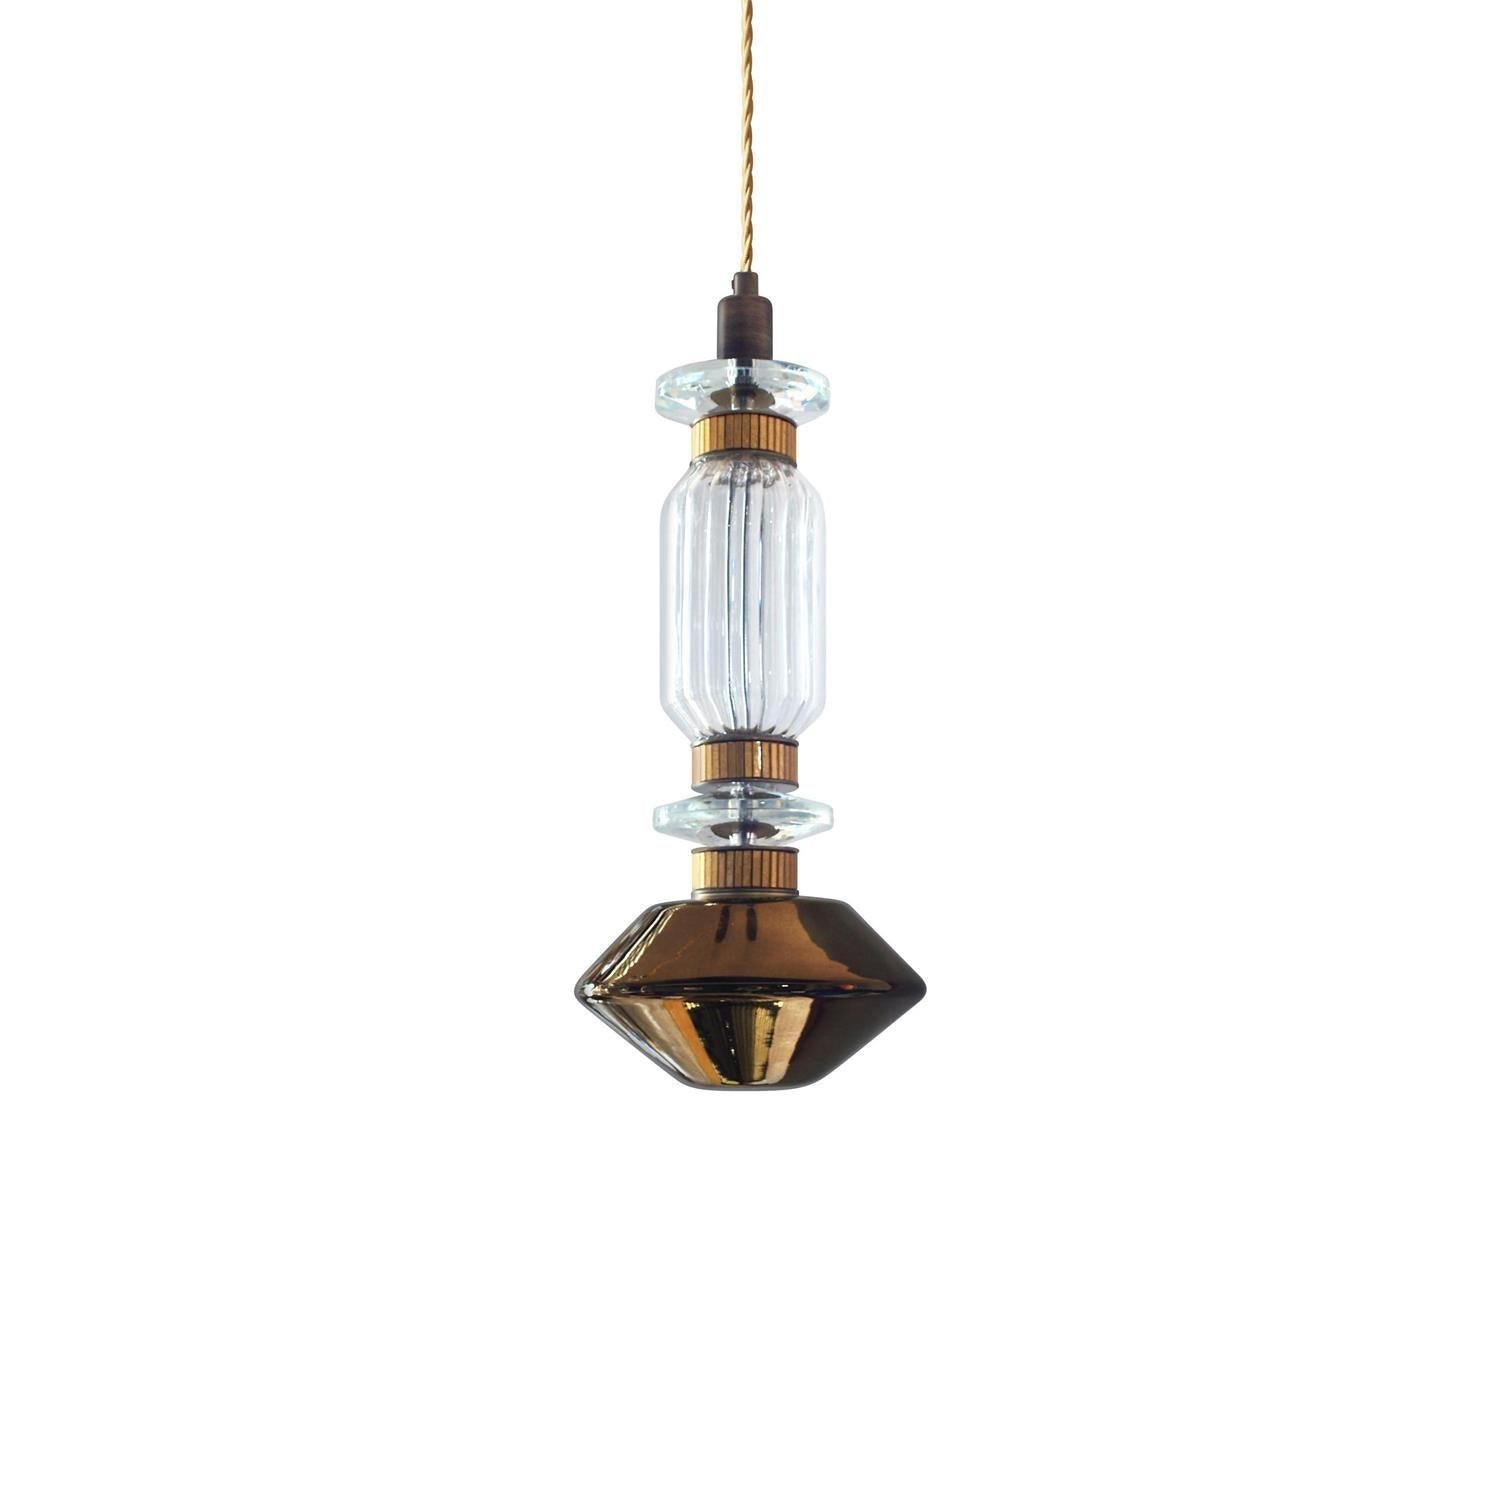 Ballet Pendant Lamp Model B with a Diameter of 9.8 inches and a Height of 17.7 inches, or 25cm x 45cm, in a Clear Design and Emitting a Cool Light.